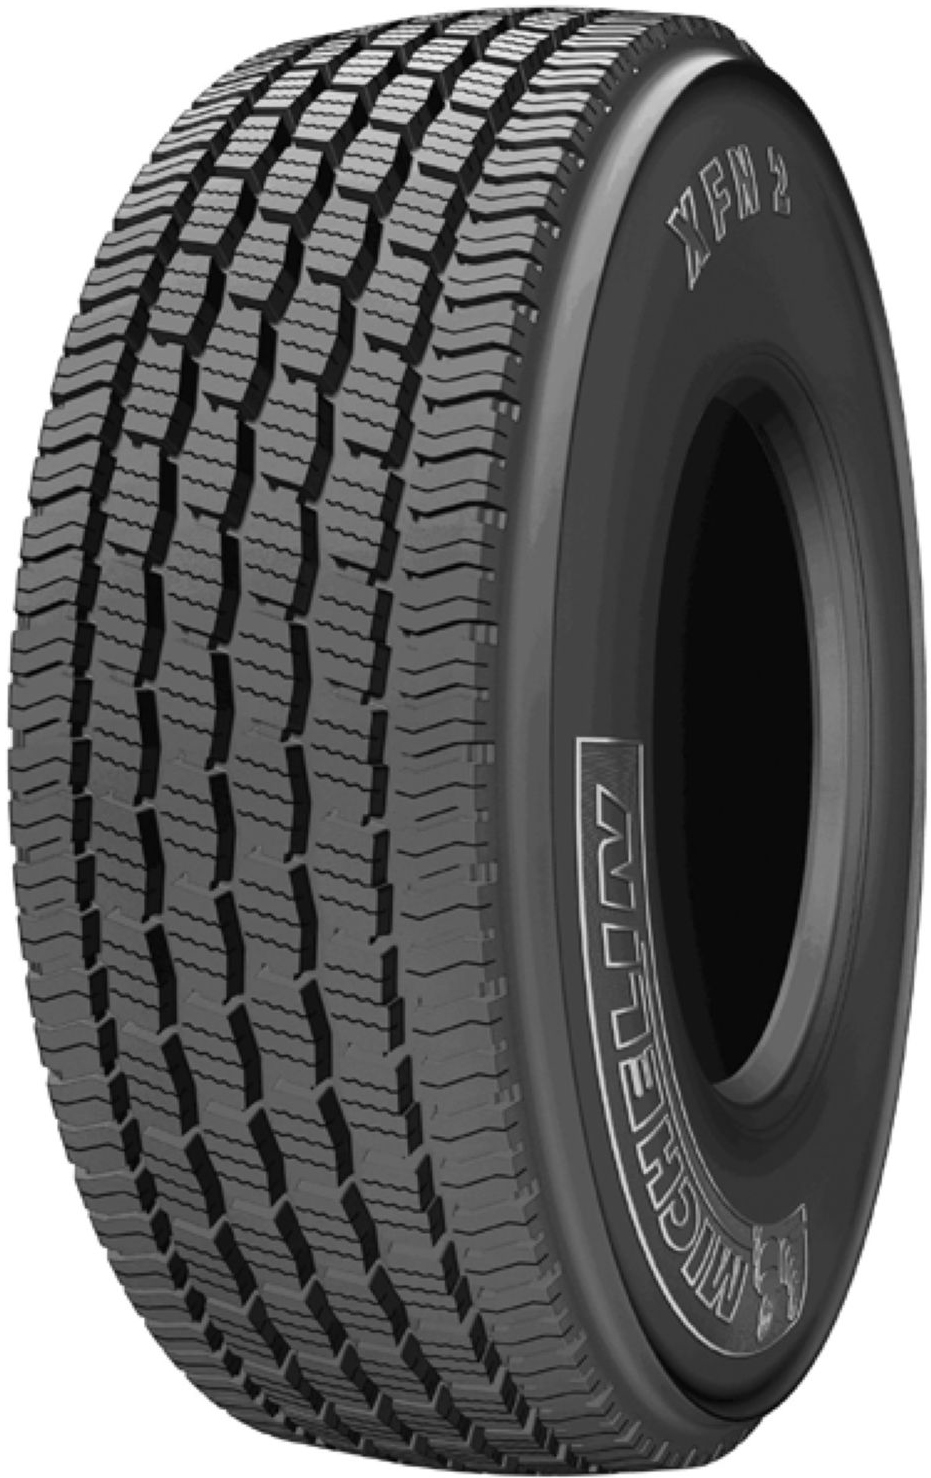 product_type-heavy_tires MICHELIN XFN 2 AS 295/80 R22.5 152M